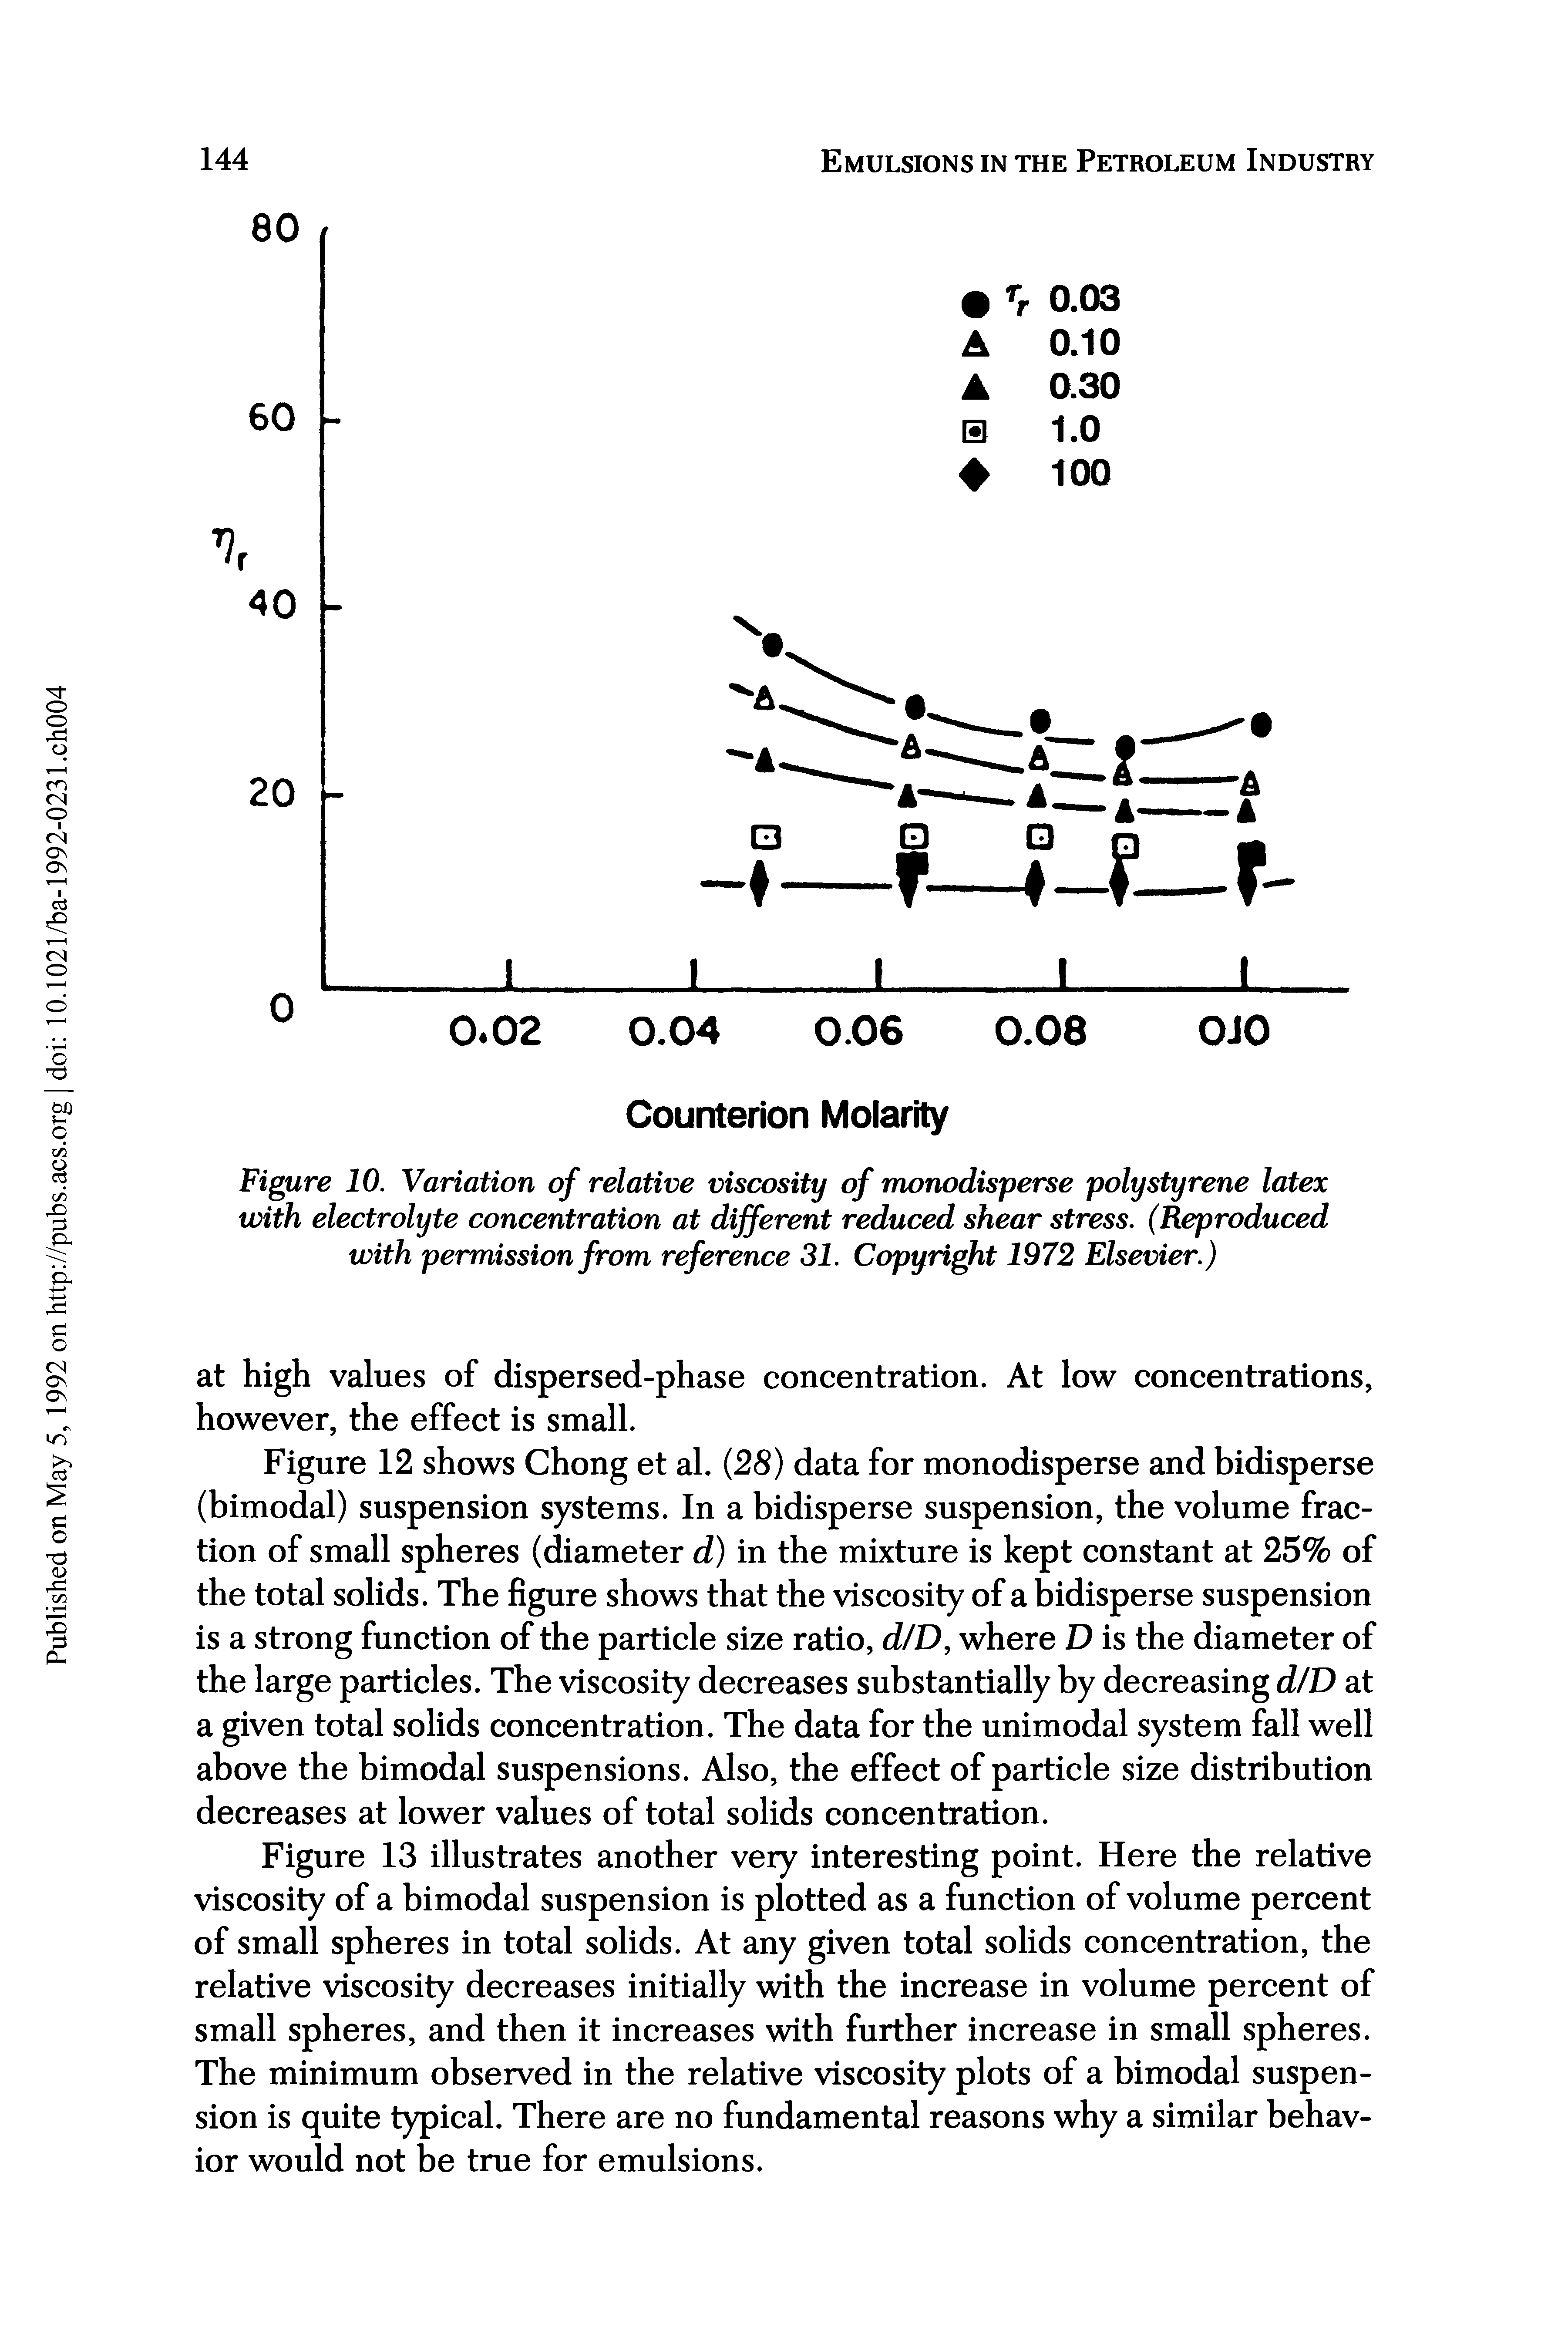 Figure 10. Variation of relative viscosity of monodisperse polystyrene latex with electrolyte concentration at different reduced shear stress. (Reproduced with permission from reference 31. Copyright 1972 Elsevier.)...